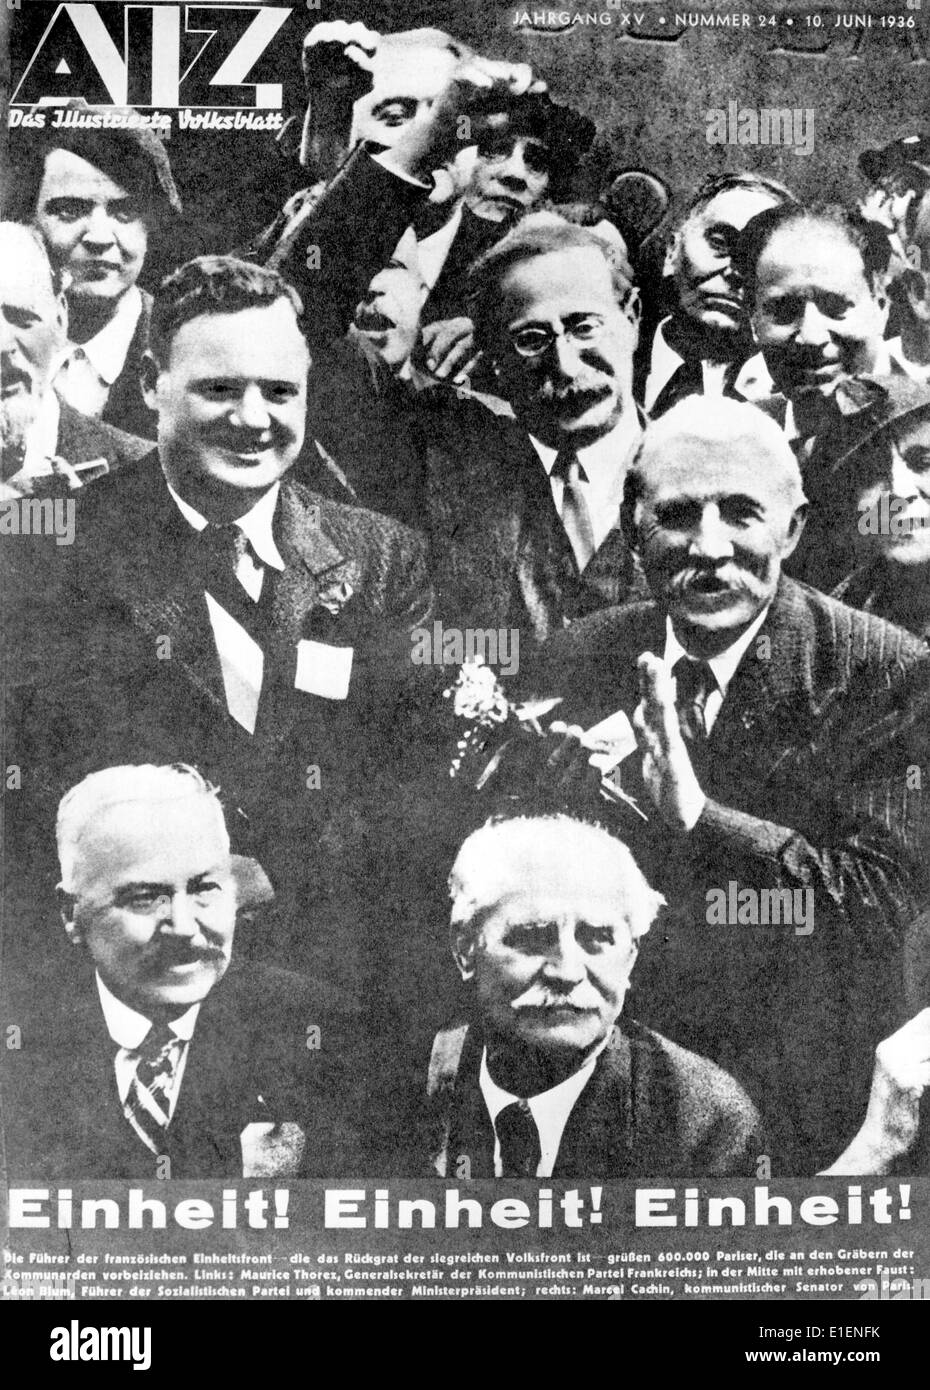 The title page of the AIZ (Workers' illustrated newspaper) from 10 June 1936 shows secretary general of the French Communist Party ((Parti communiste francais/PCF), Maurice Thorez (2nd row-L), leader of the Socialist party (Section francaise de l Internationale ouvrière, SFIO) and the first Socialist French prime minister after the 1936 elections, Leon Blum (2nd row with raised fist) and the communist senator of Paris, Marcel Cachin (2nd row-R) as leader of the Front populaire, the union of French left-wing parties. Fotoarchiv für Zeitgeschichtee - NO WIRE SERVICE Stock Photo